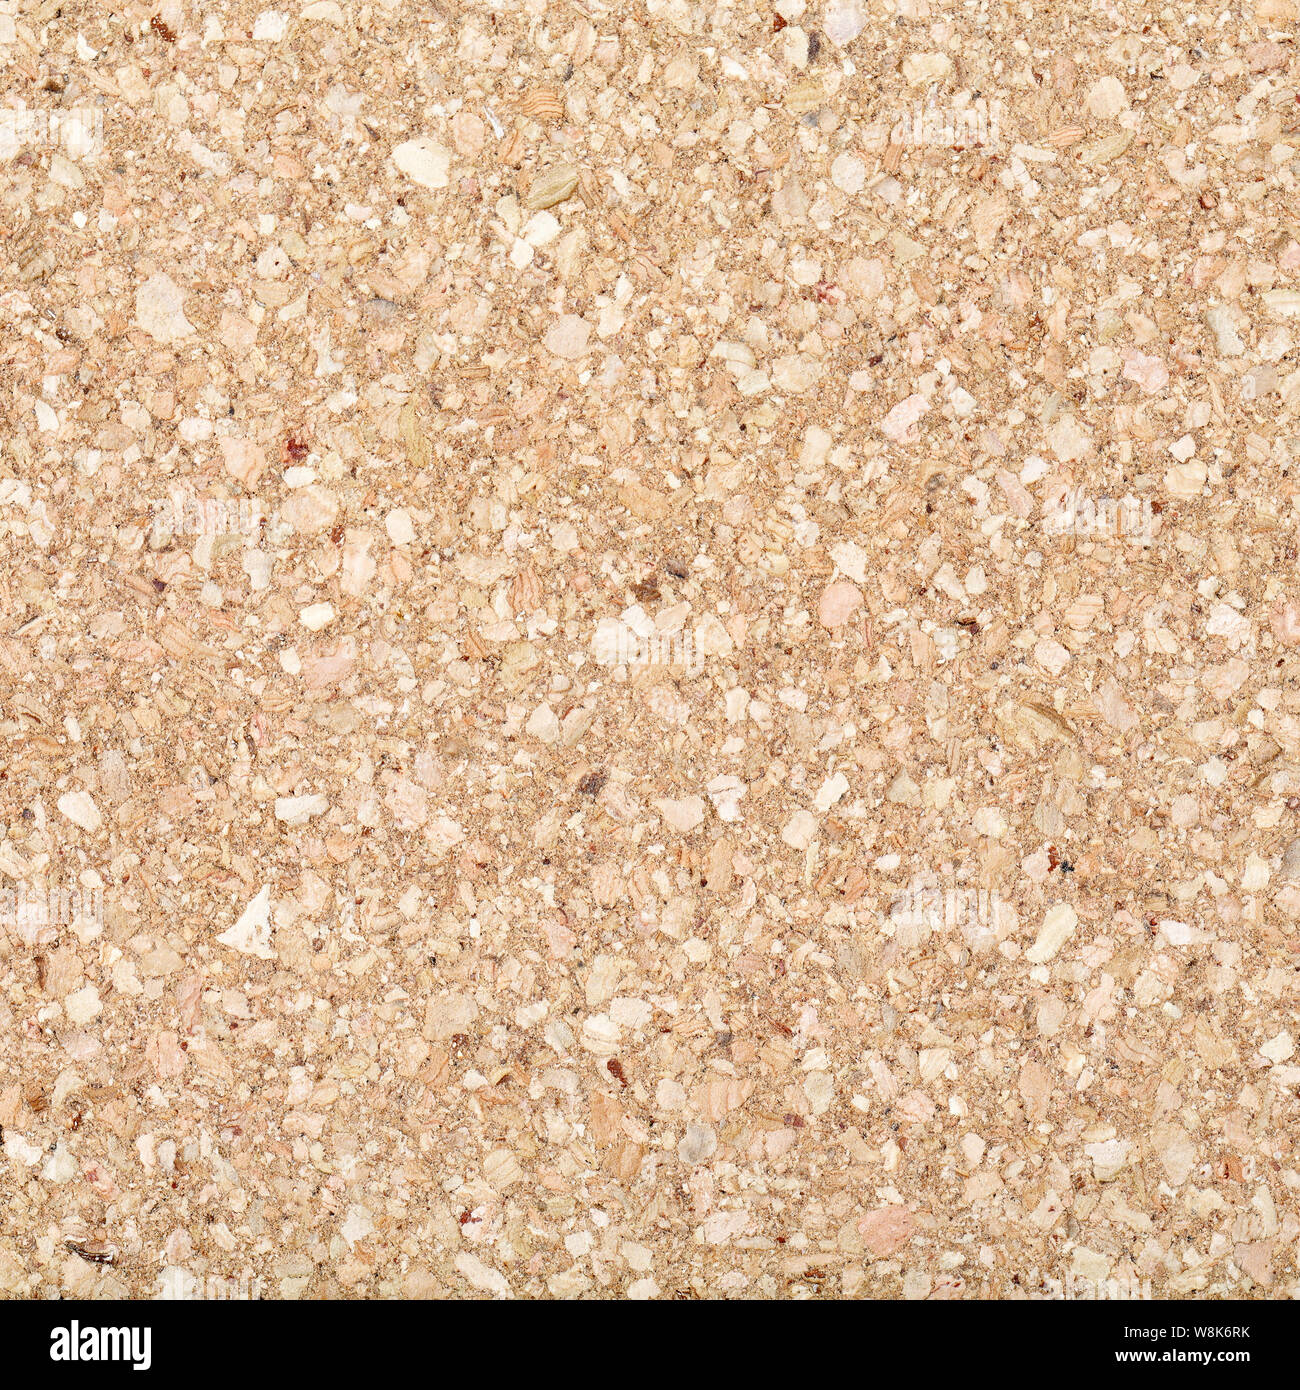 Natural cork texture closeup background for text copy space. Square crop of brown cork bulletin board pattern, for writing copyspace ad for education or written business advertisement concept. Stock Photo